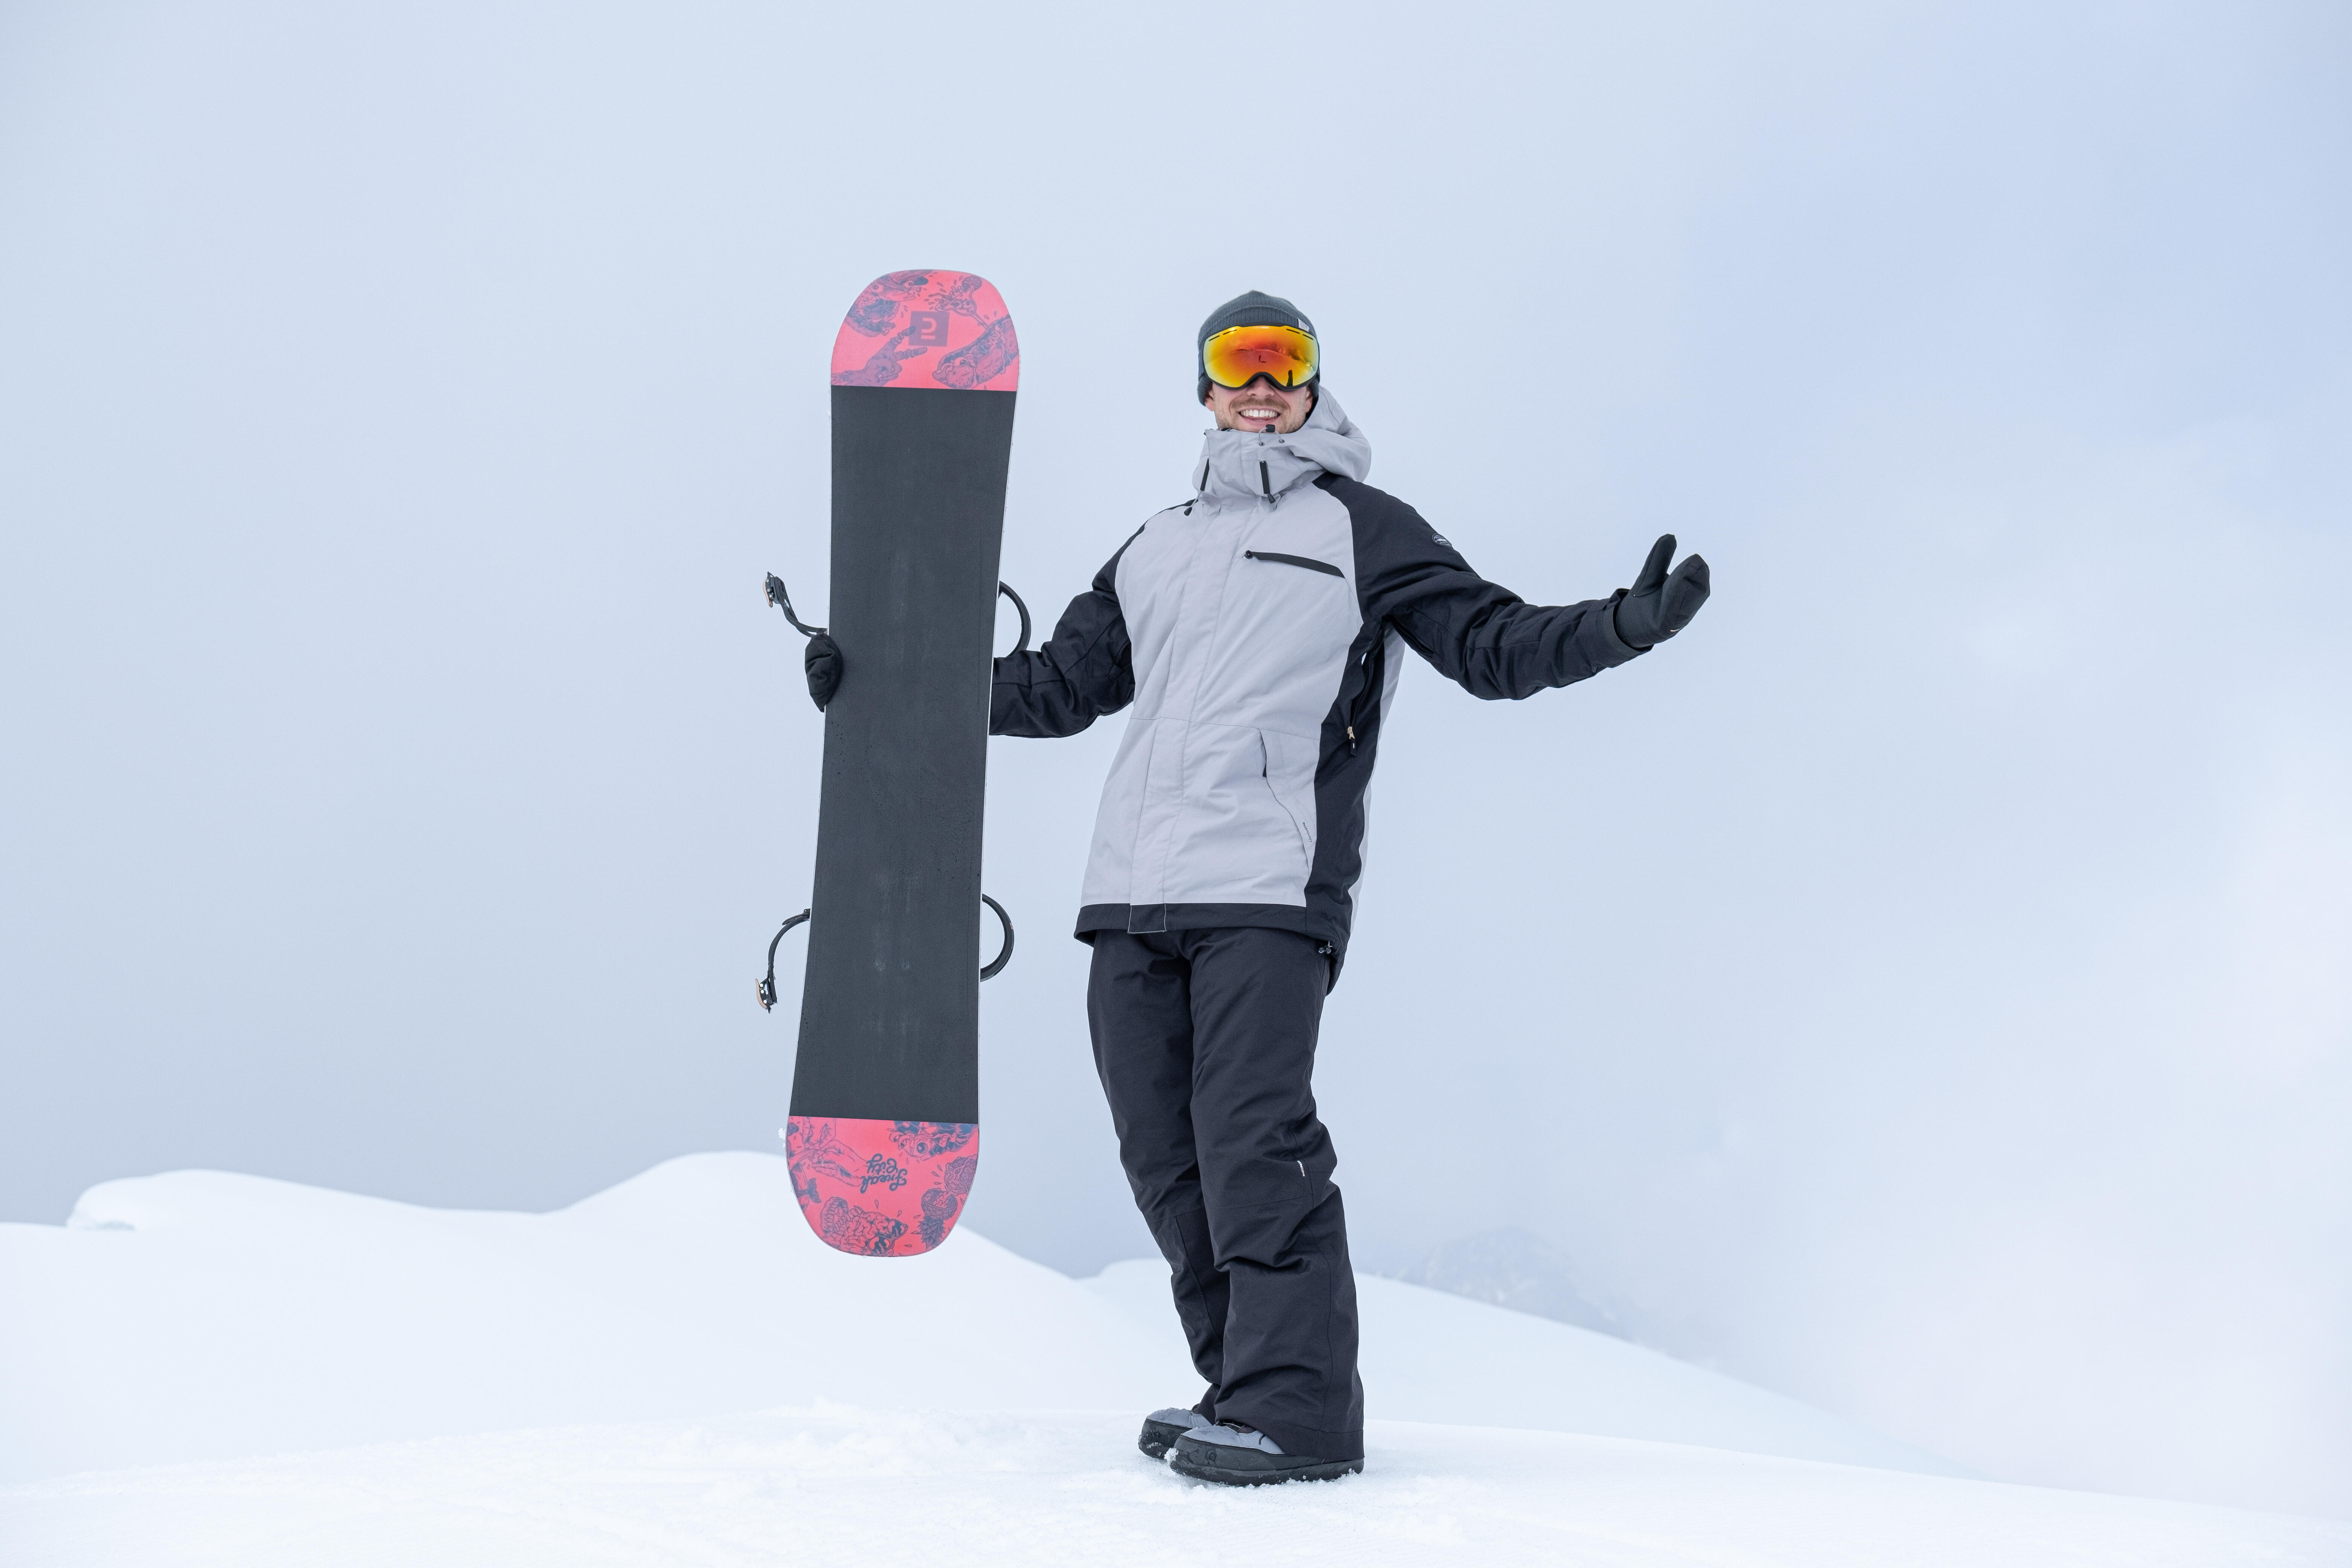 Men's Snowboard Jackets, Free Delivery